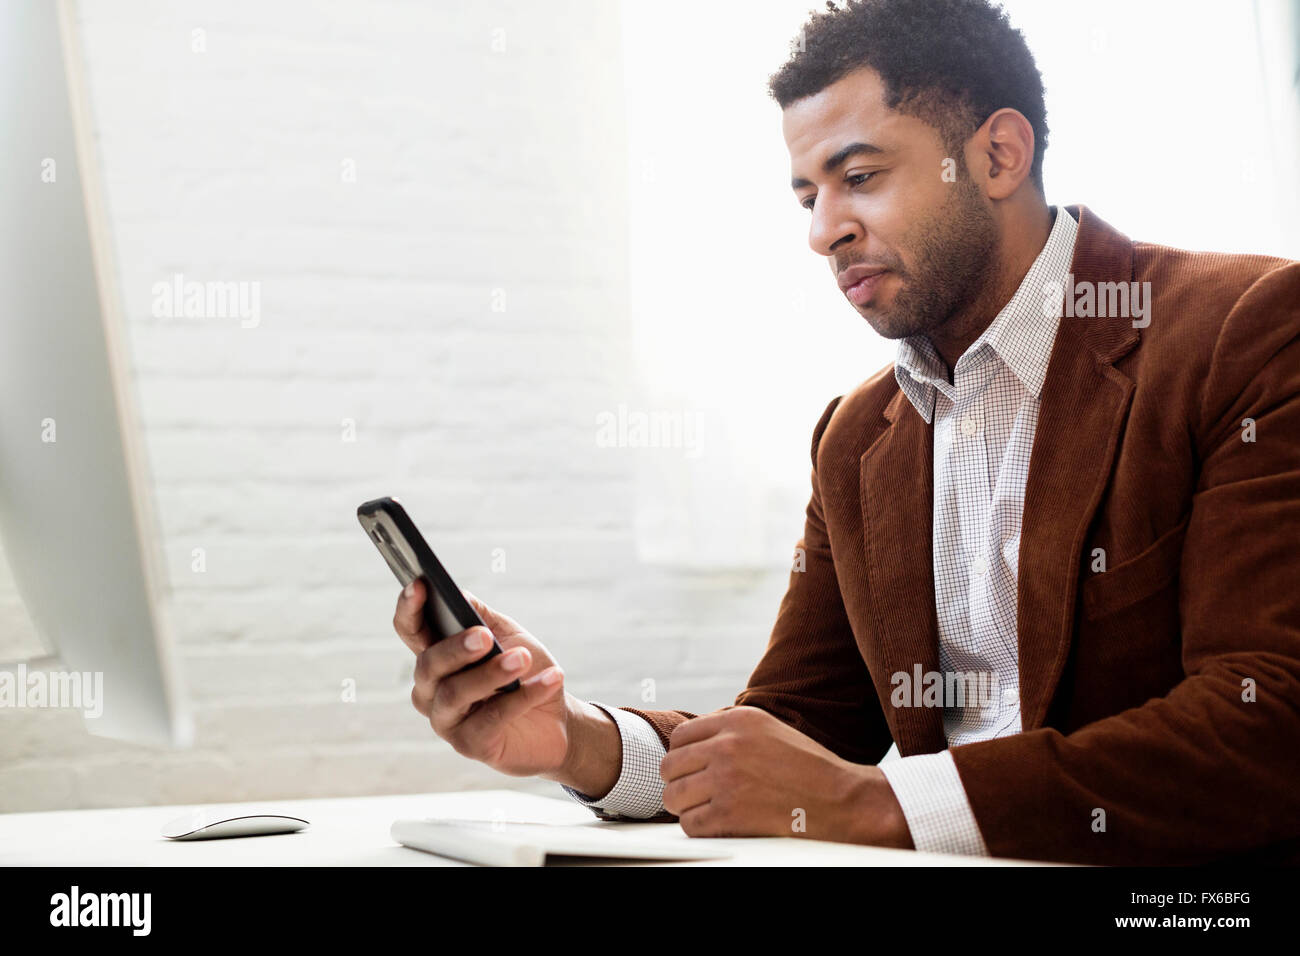 African American businessman using cell phone in office Banque D'Images